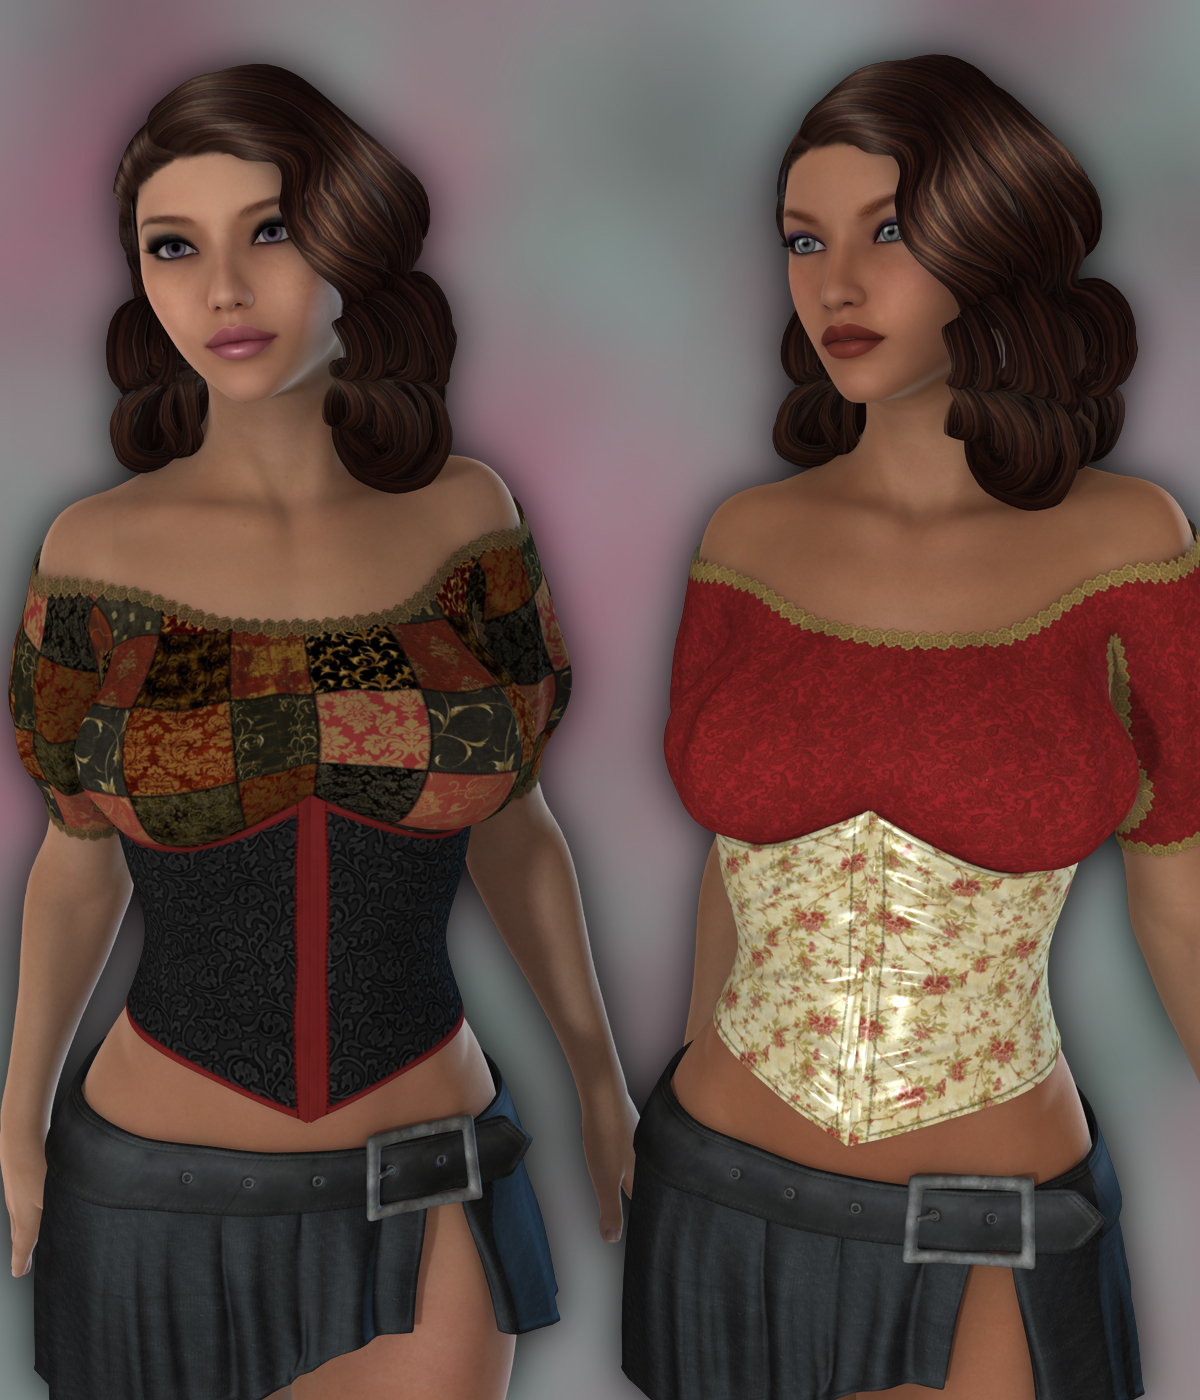 VERSUS - Lace Crop Top for Genesis 3 Females by: Anagord, 3D Models by Daz 3D